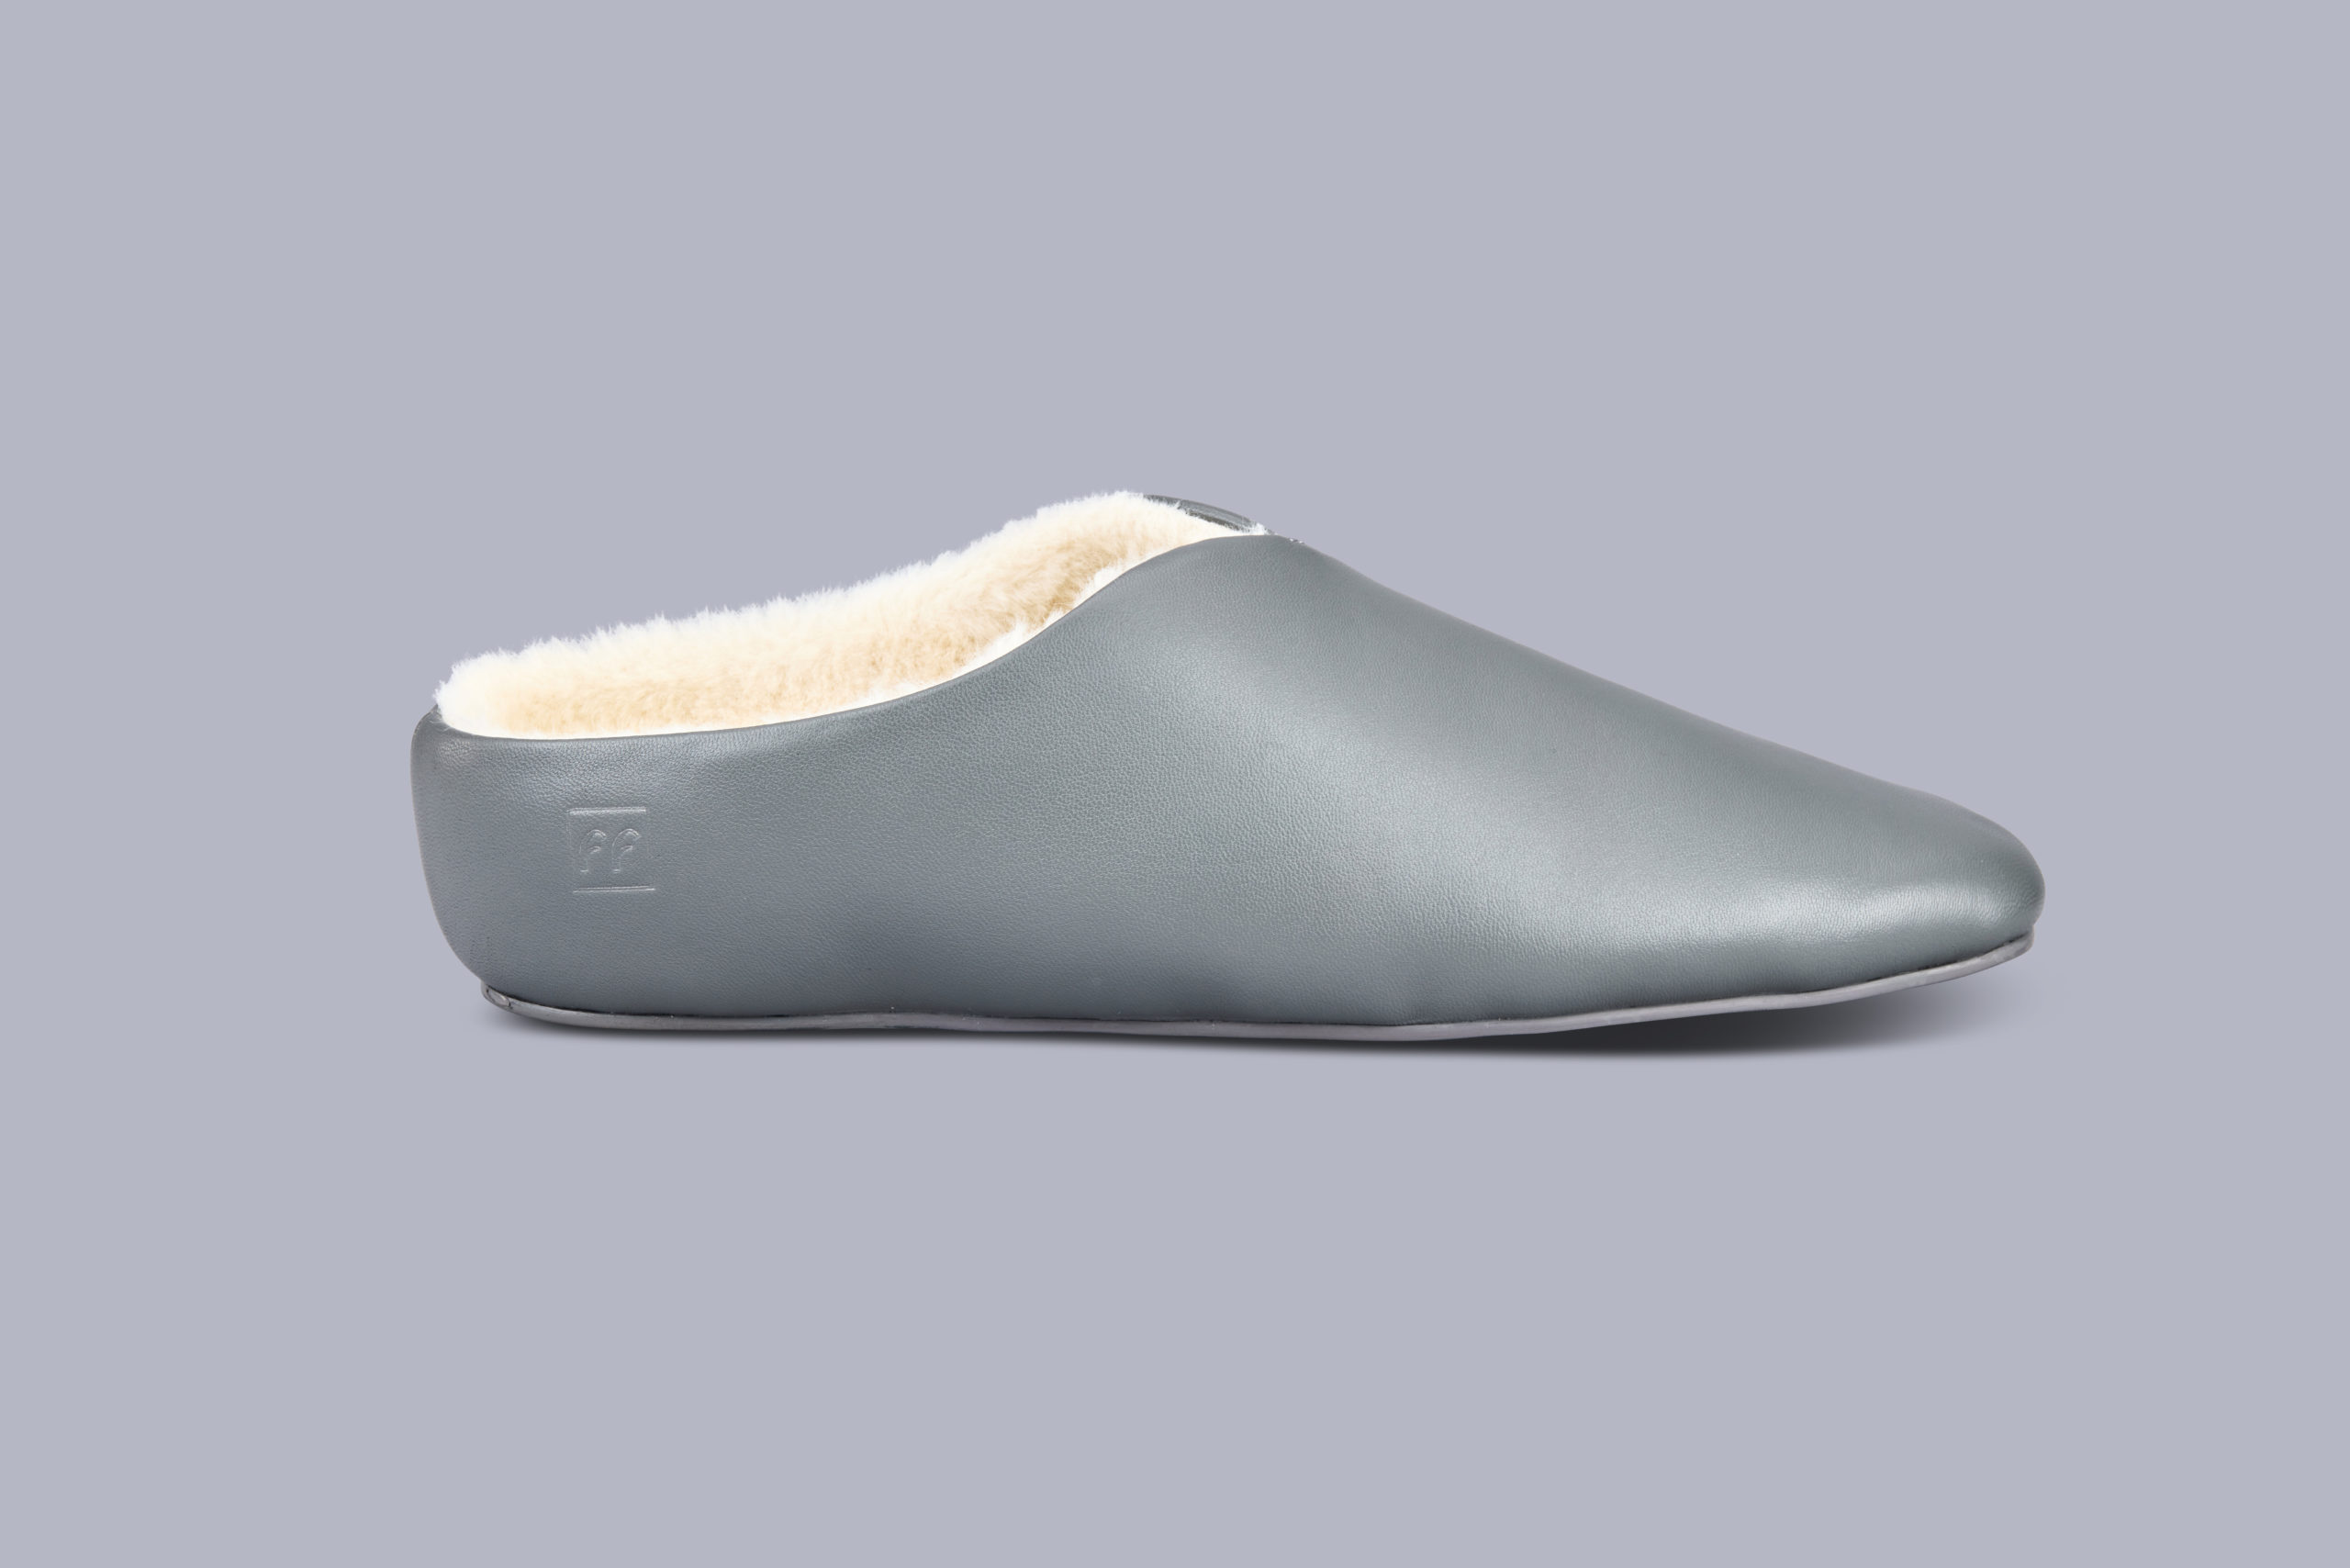 The London charcoal grey slipper side view